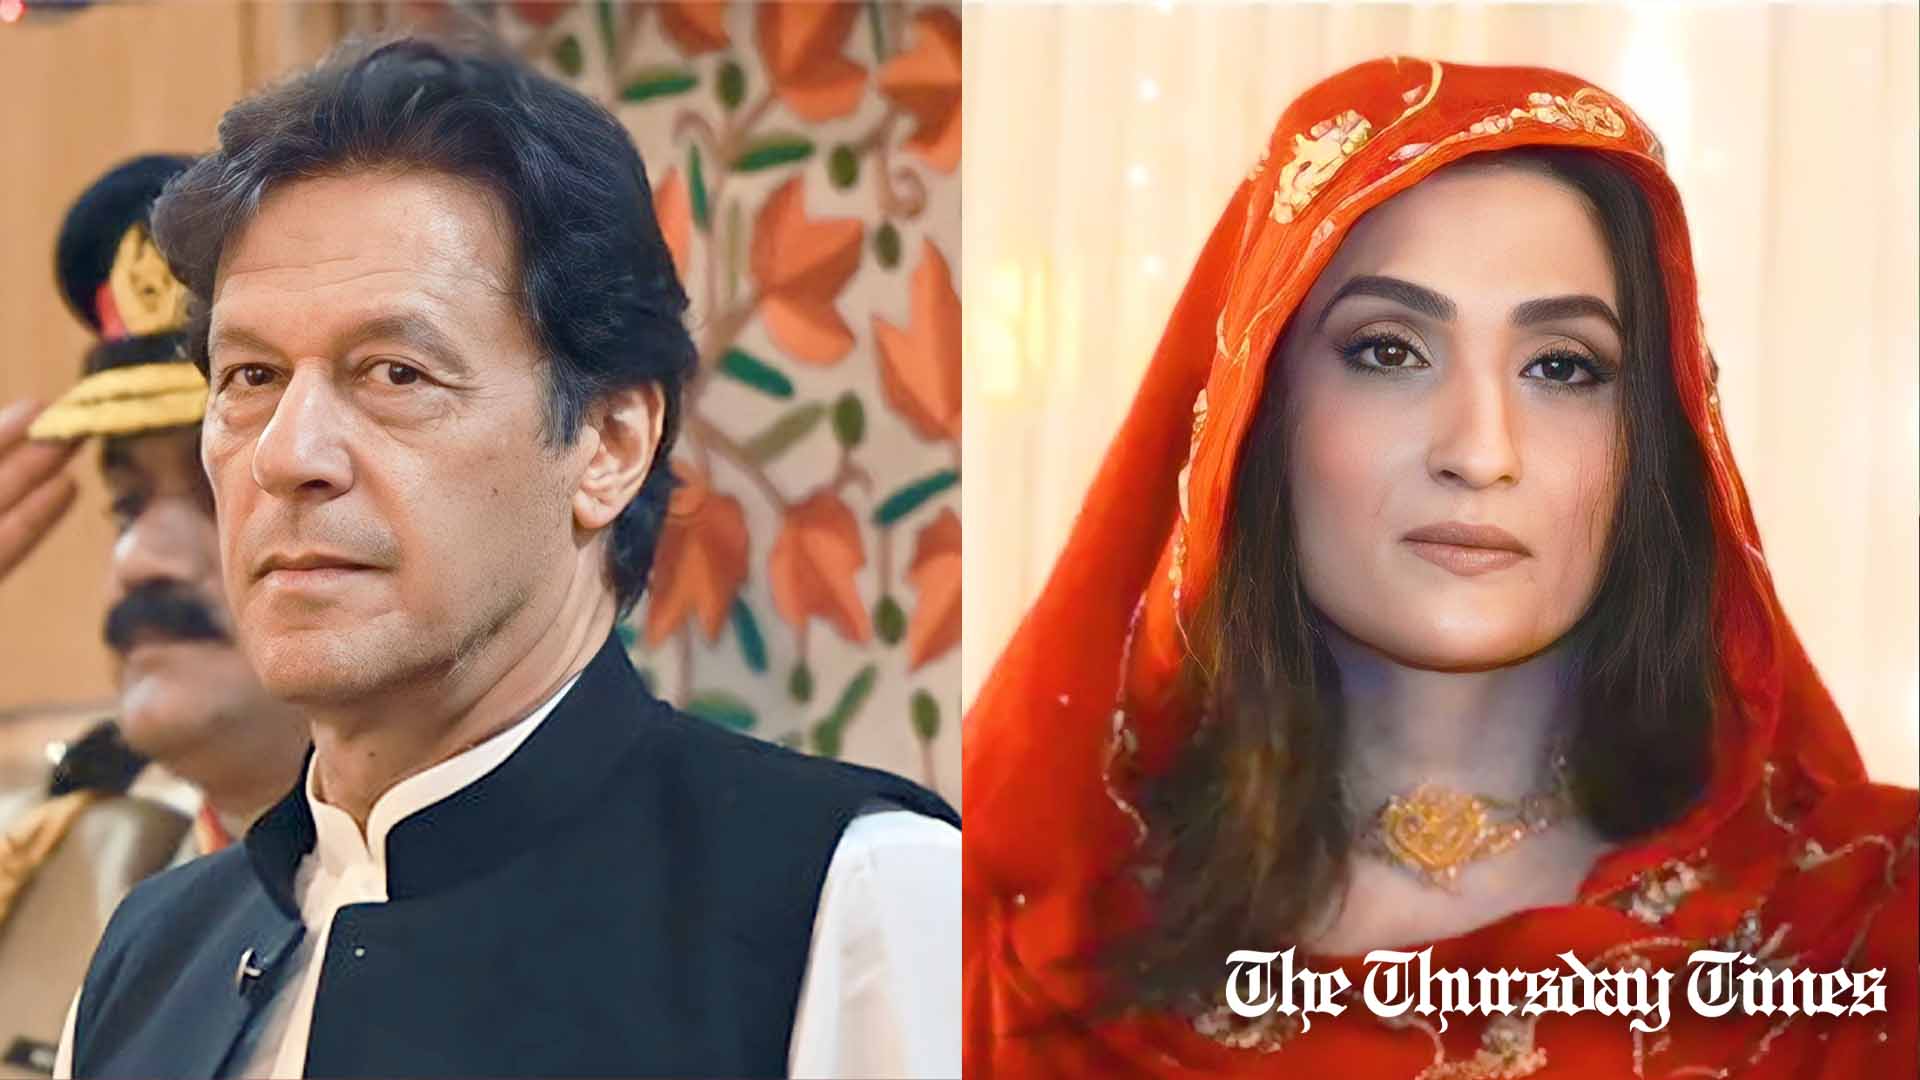 A combined file photo shows PTI chairman Imran Khan (L) and former first lady of Pakistan Bushra Maneka (R). — FILE/THE THURSDAY TIMES